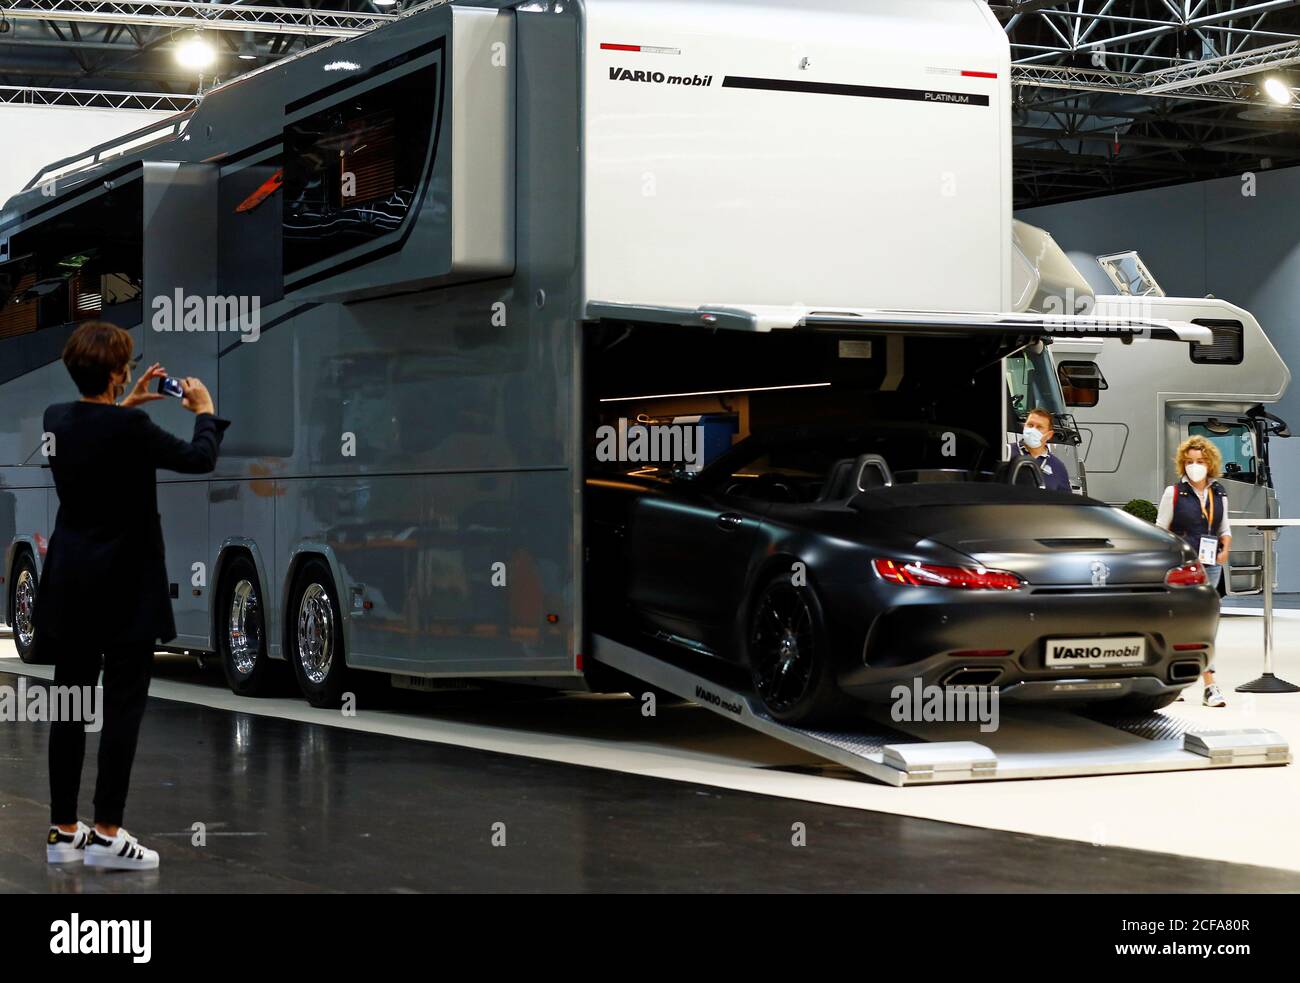 People watch the motorhome "Vario Perfect 1200 Platinum" of German motorhome  maker Variomobil at the consumer trade fair "Caravan Salon" for caravans,  motorhomes and camping, which is one of the first fairs